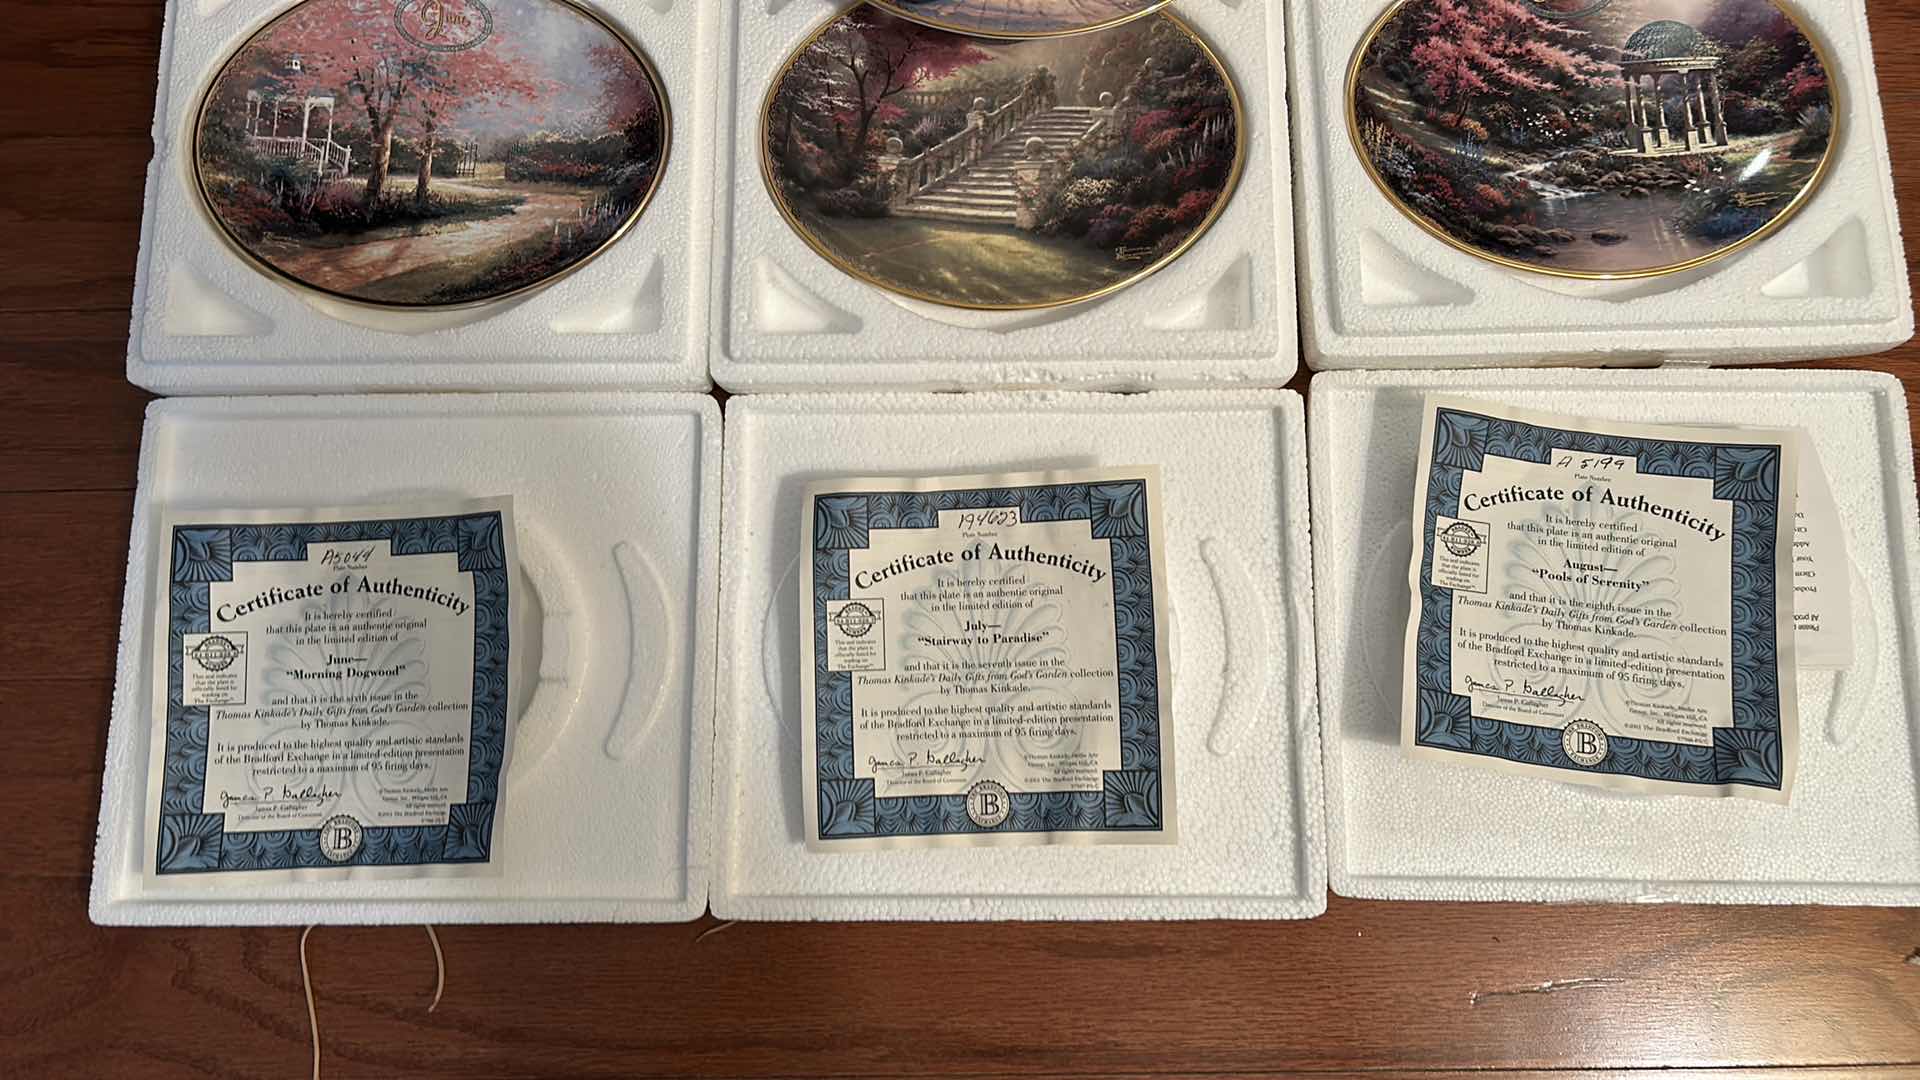 Photo 5 of 7 COLLECTIBLE PLATES WITH COA